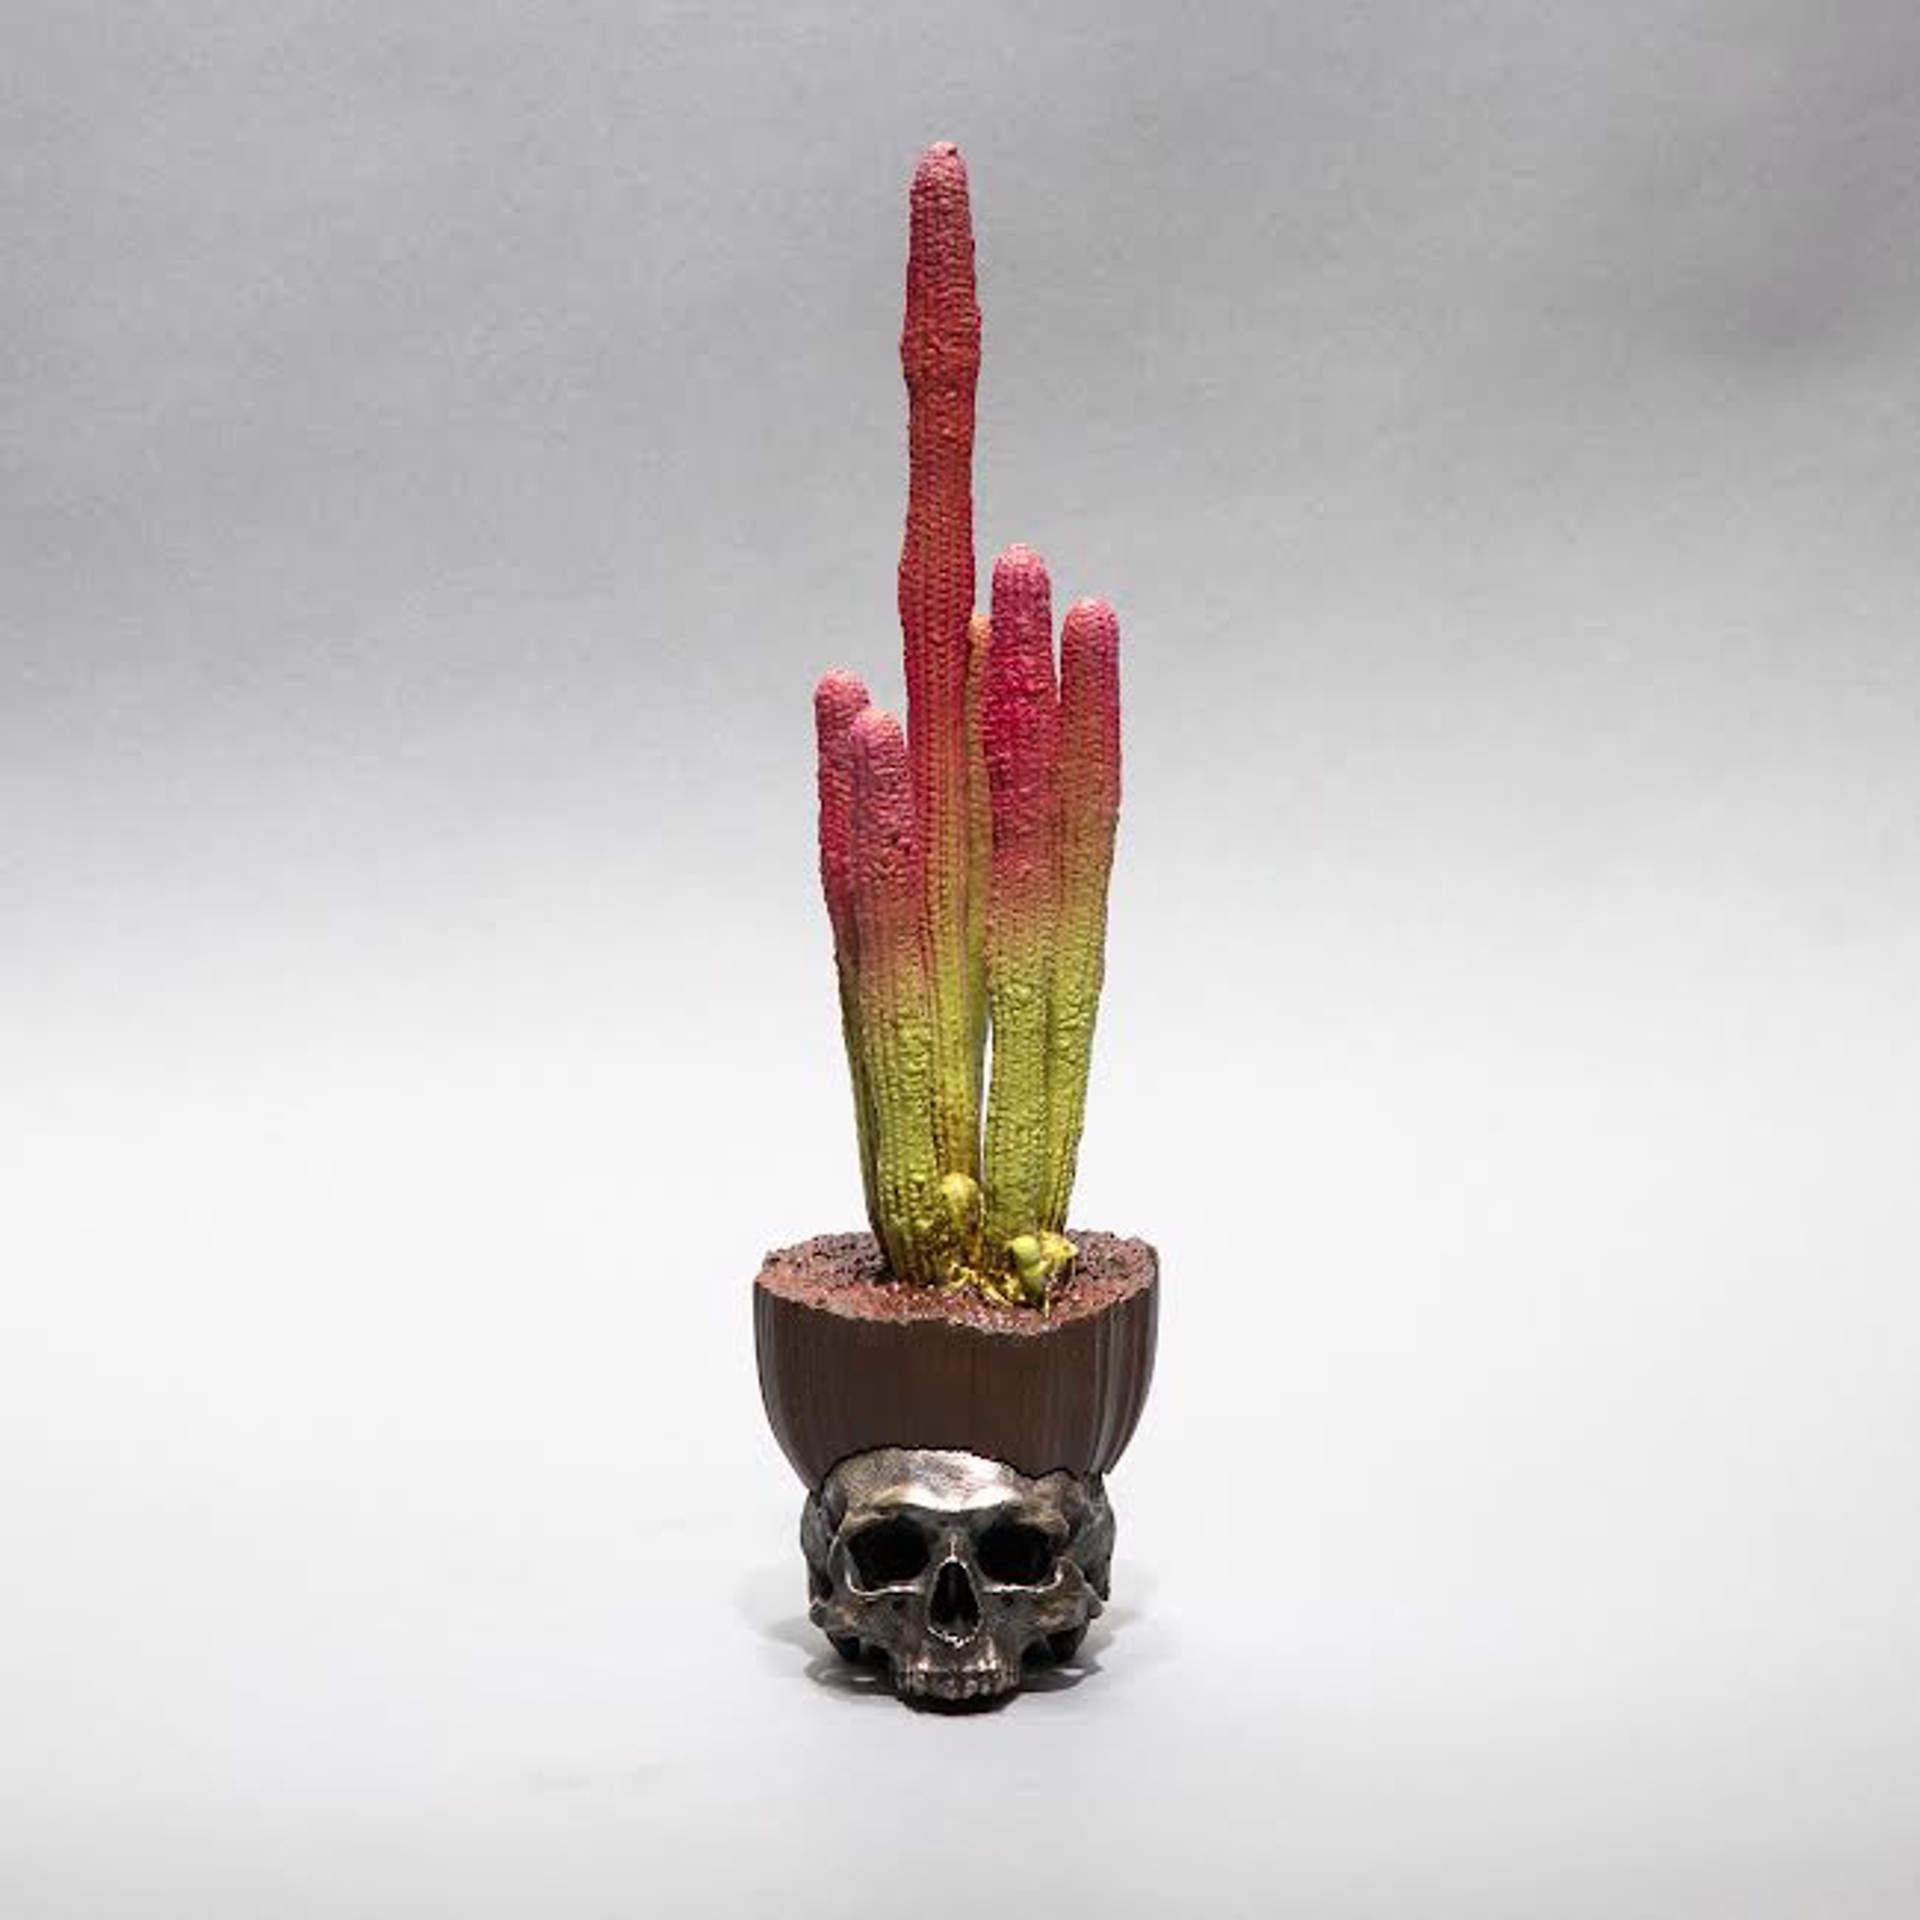 "Cactus Skull 5" by Dana Younger